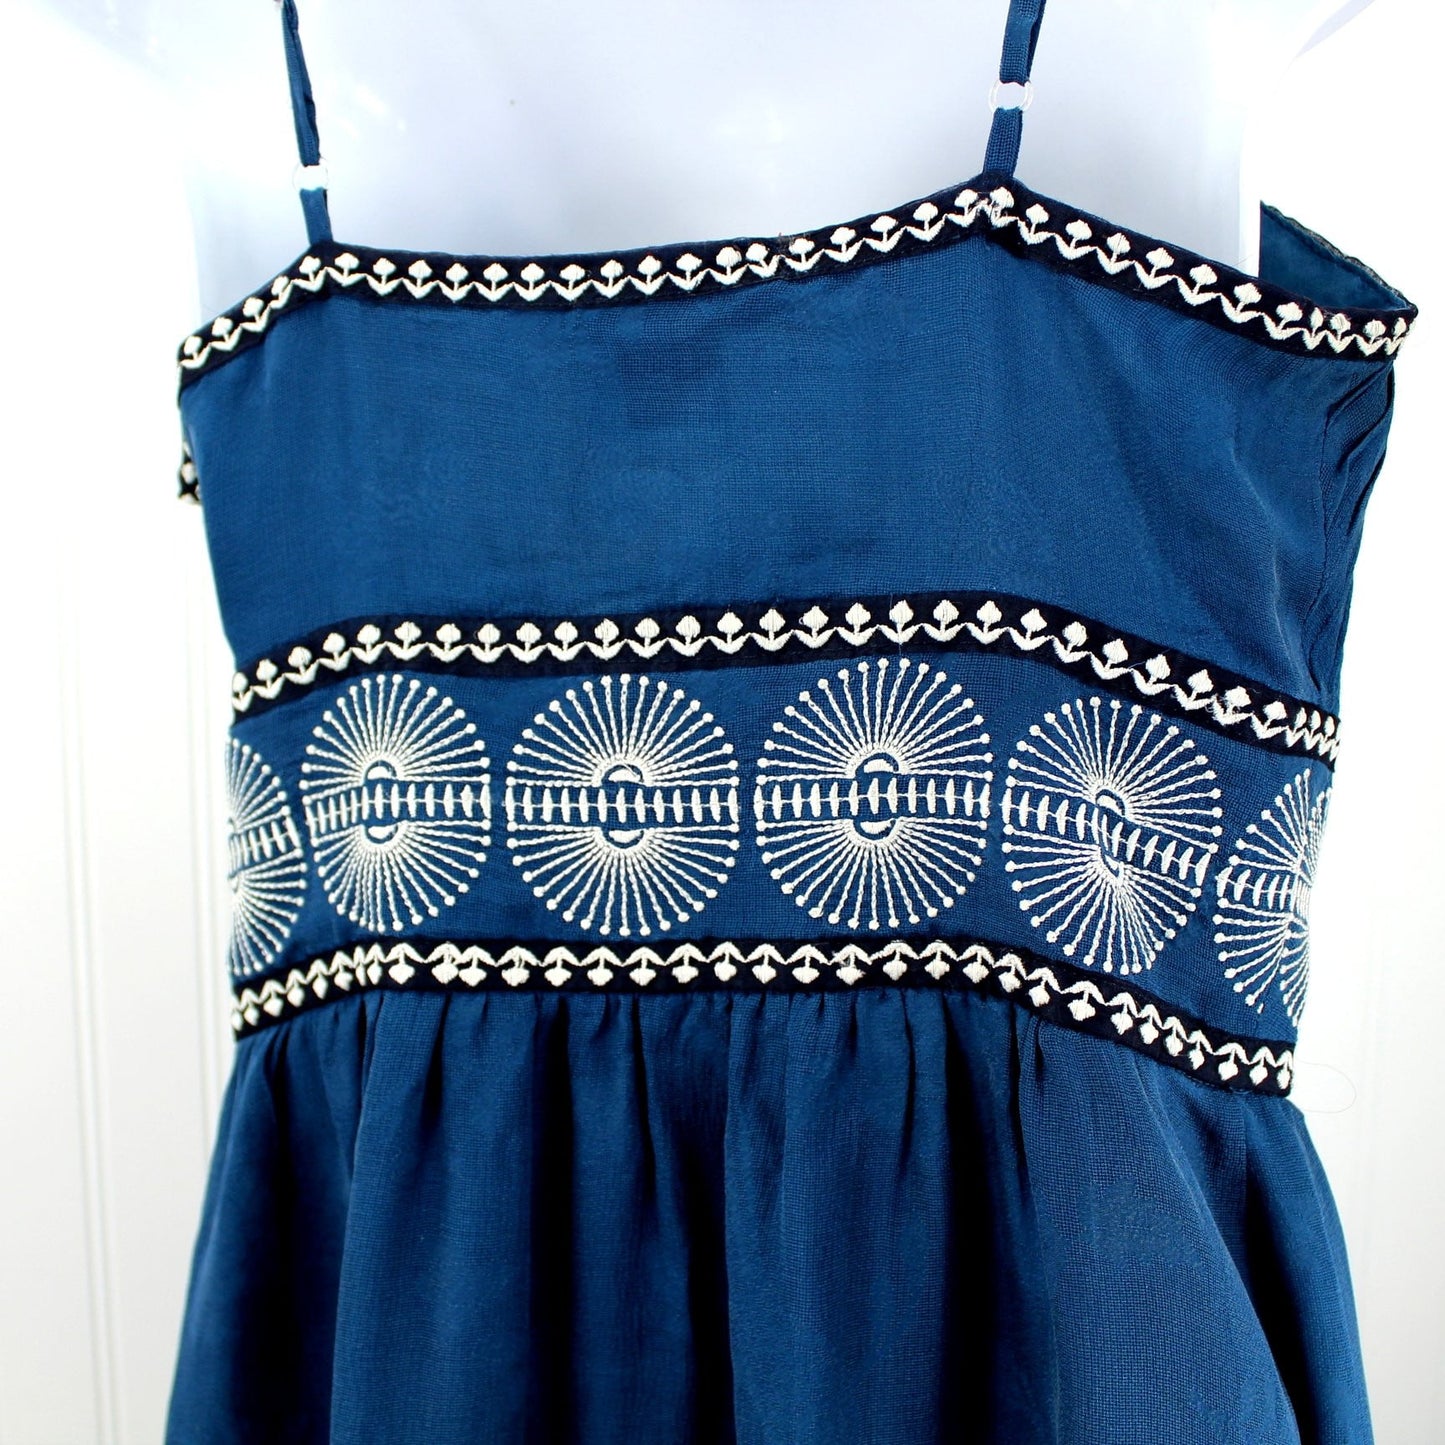 Shanghai Tang Silk Party Dress Blue with White Embroidery US10 Tag pinwheel design embroidery